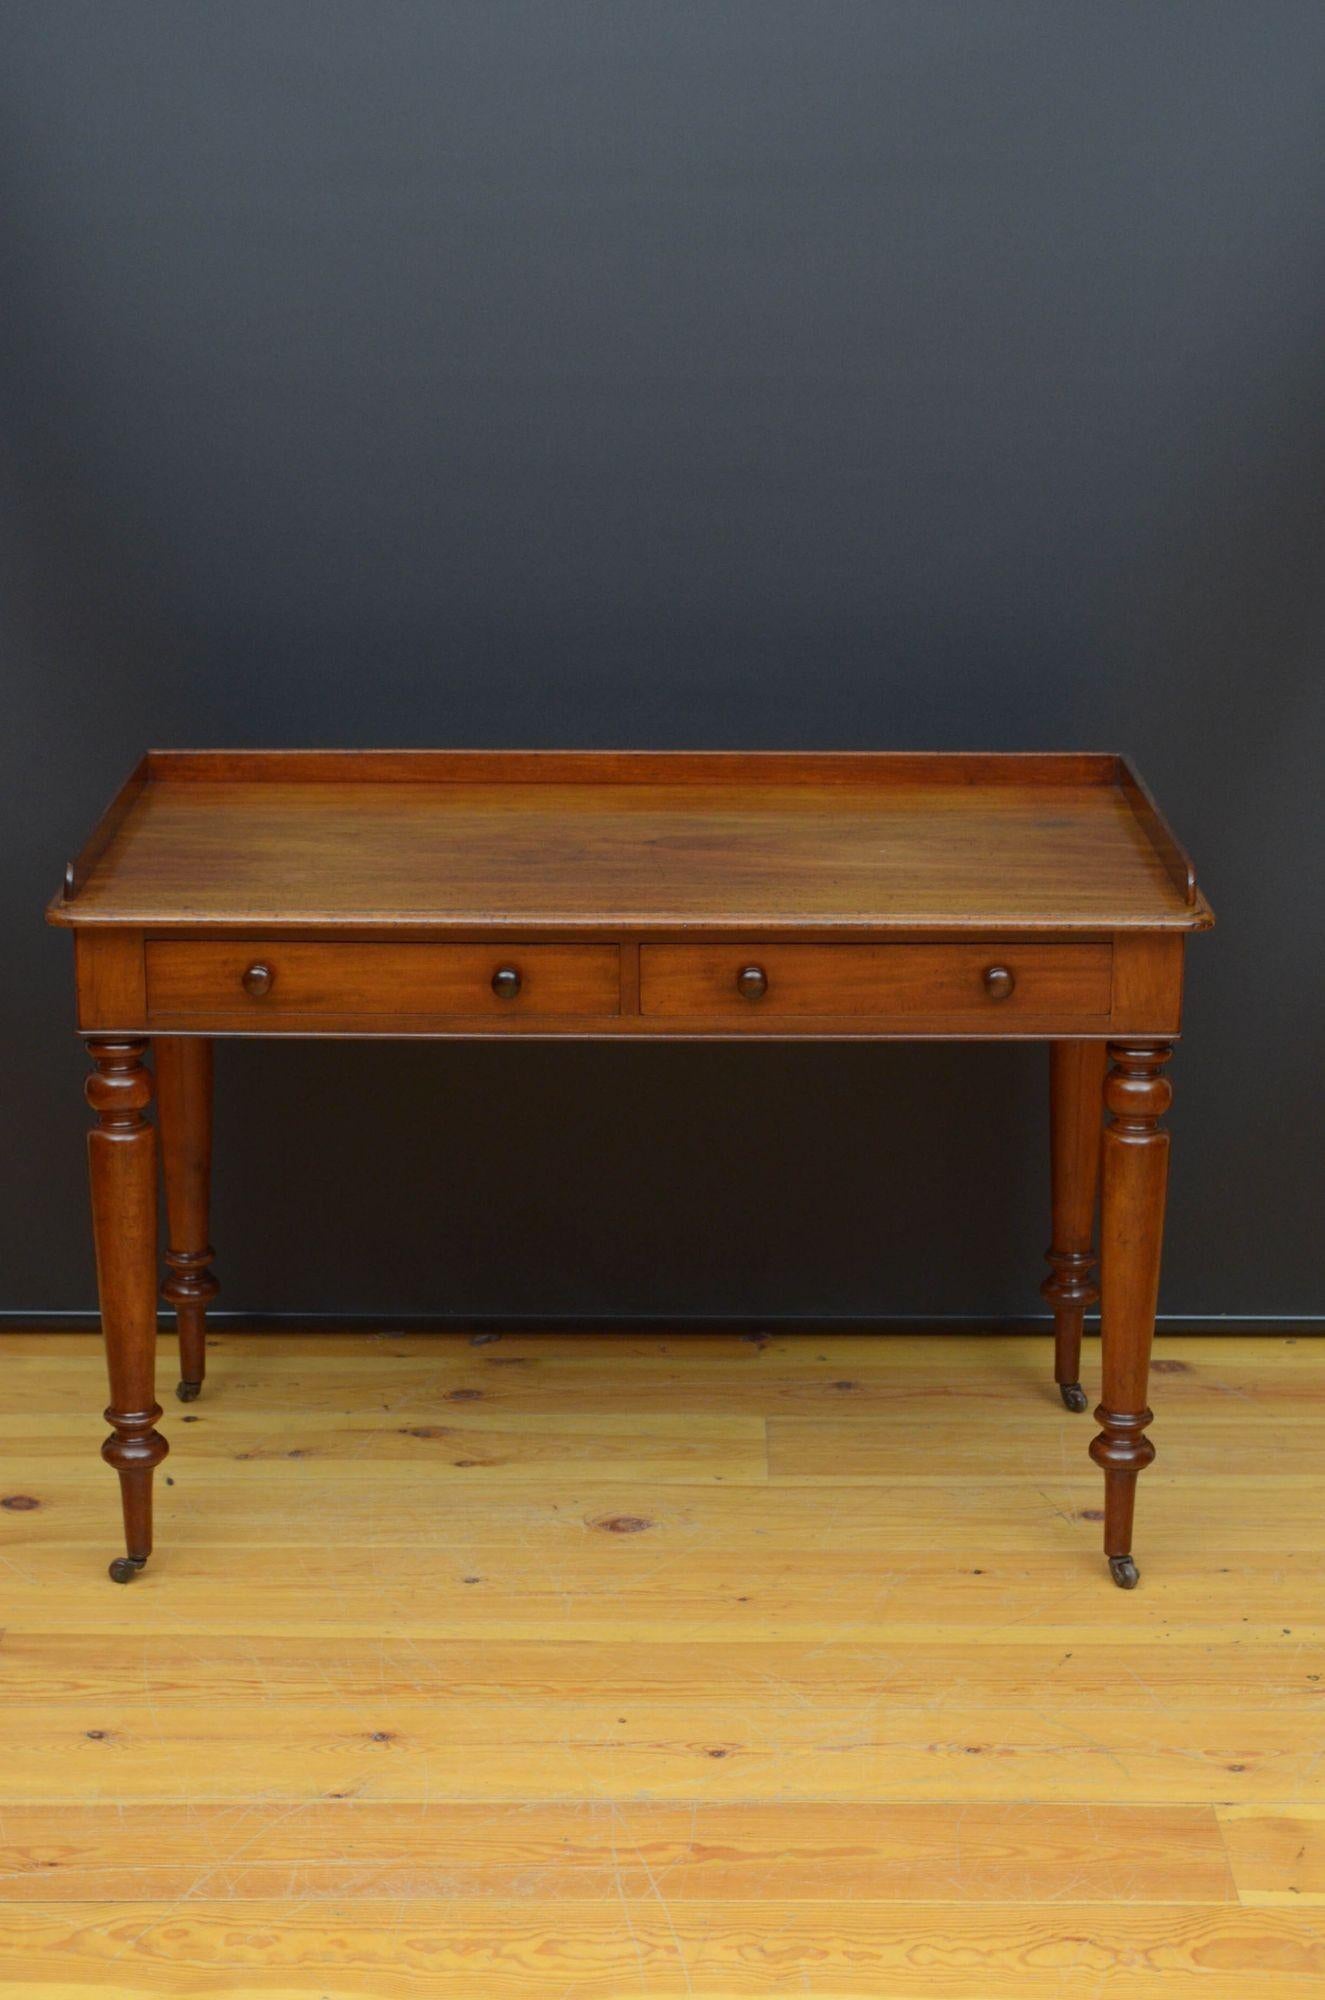 St038 William IV mahogany writing table or dressing table, having shaped upstand and figured mahogany top with moulded edge above two frieze drawers fitted with turned handles, all standing on turned, tapered leg terminating in brass castors. This